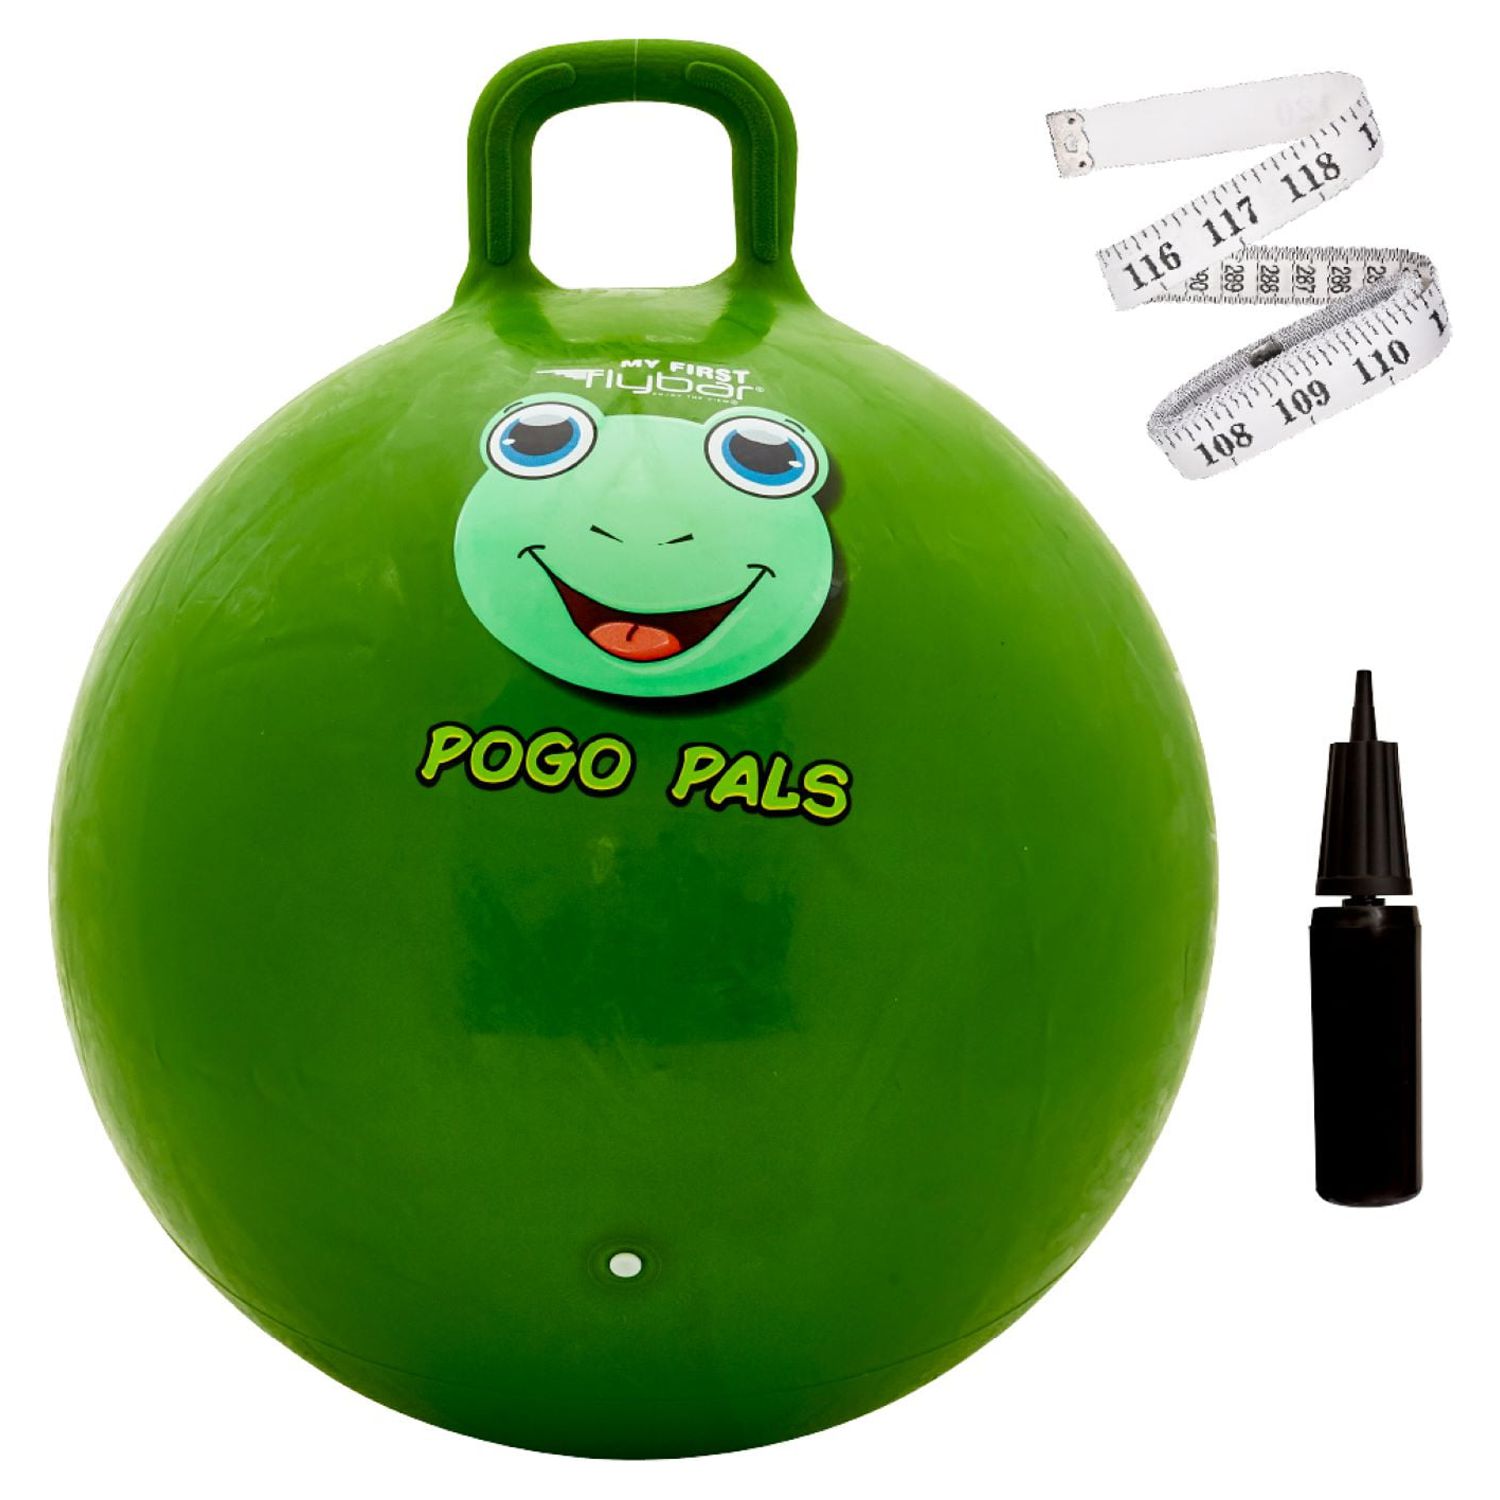 Flybar Hopper Ball for Kids - Bouncy Ball with Handle, Durable Bouncy Balls,, 225lbs, Ages 10+, Green Frog, L - image 1 of 6